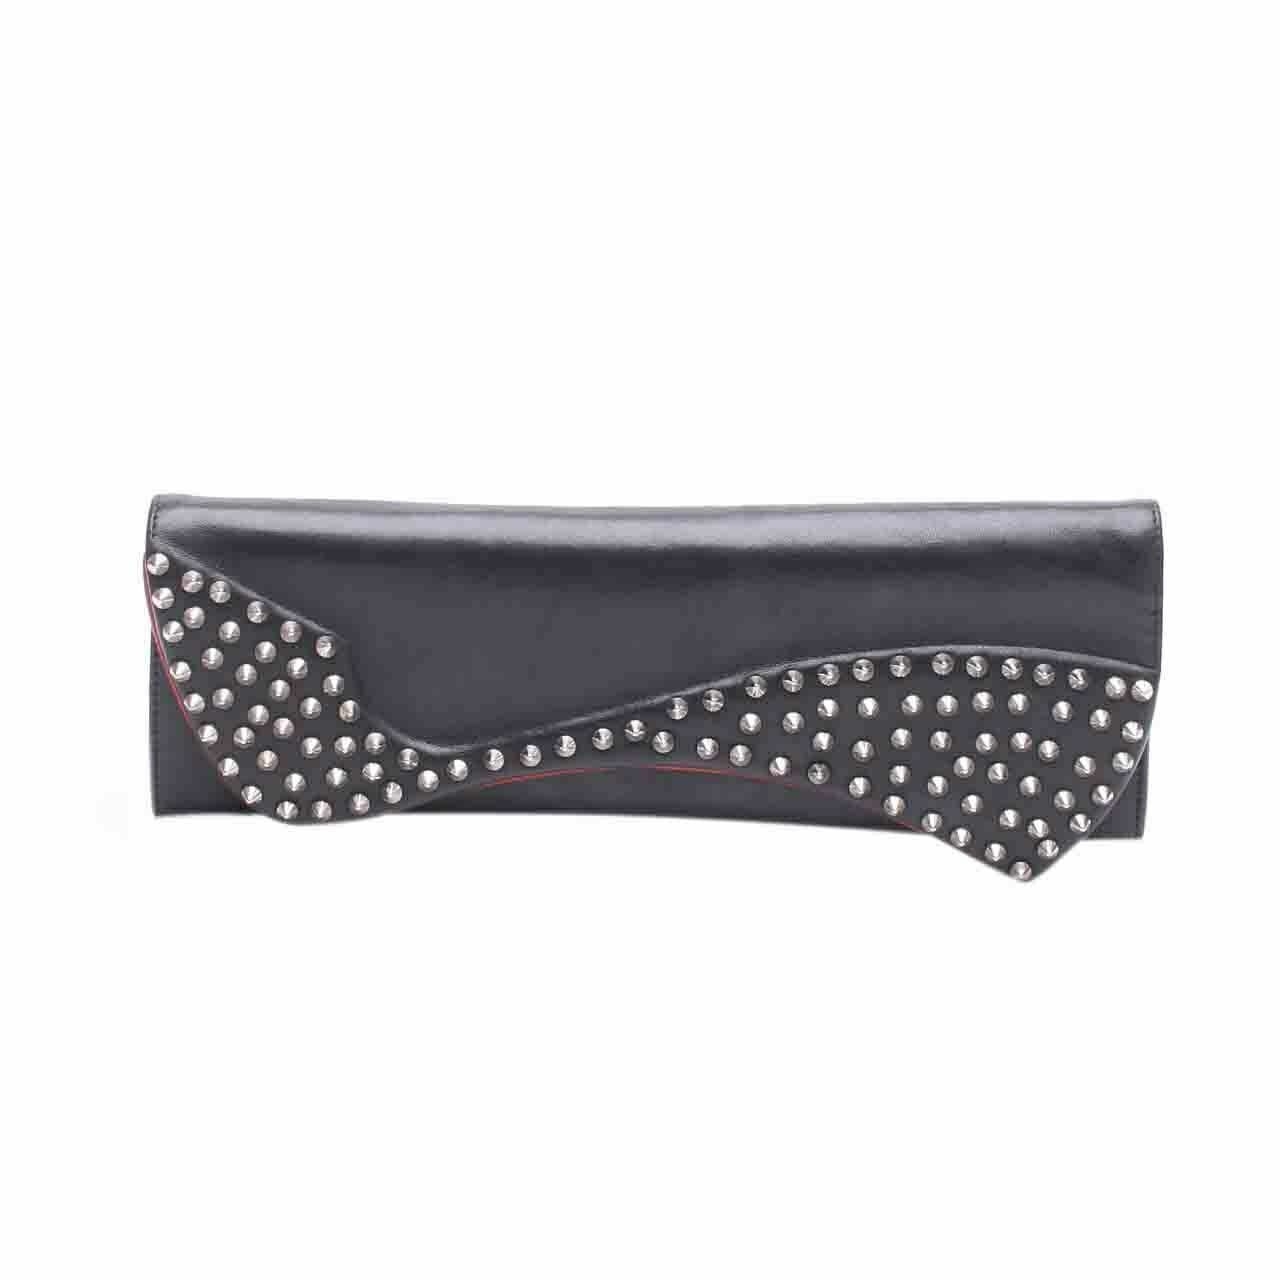 Christian Louboutin Pigalle Black with Silver Studs Clutch 